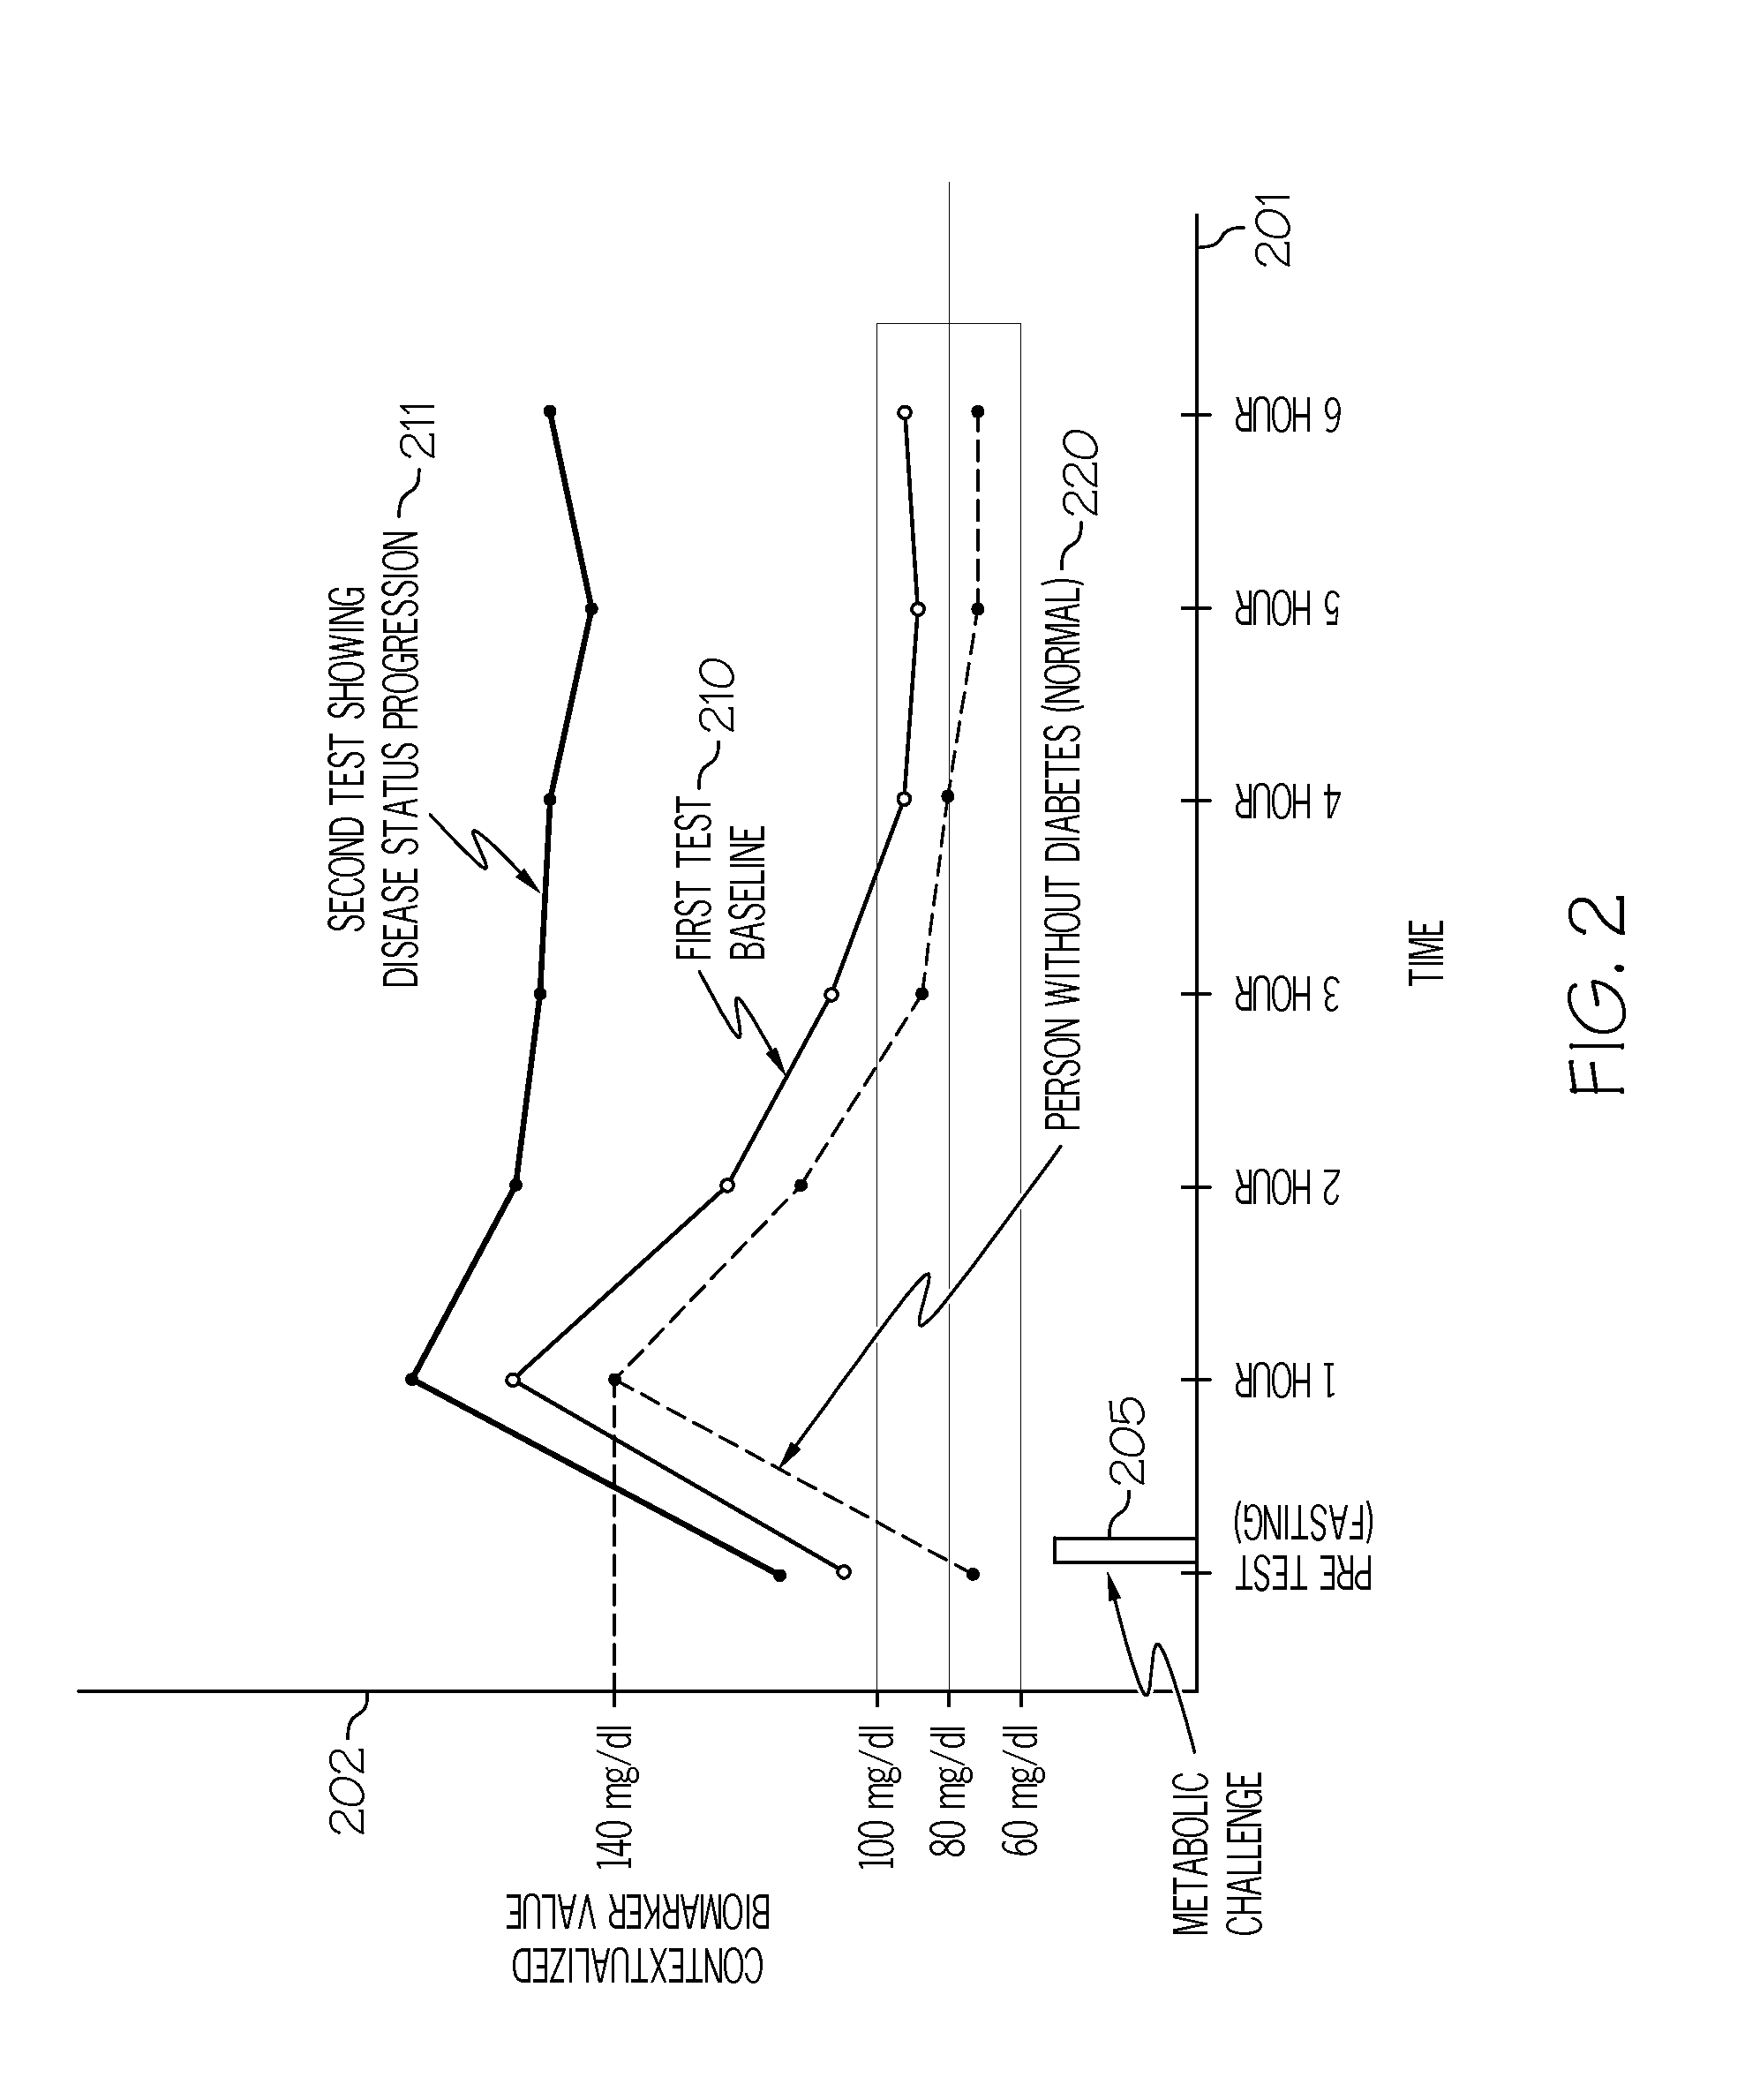 Methods and apparatus for decentralized diabetes monitoring